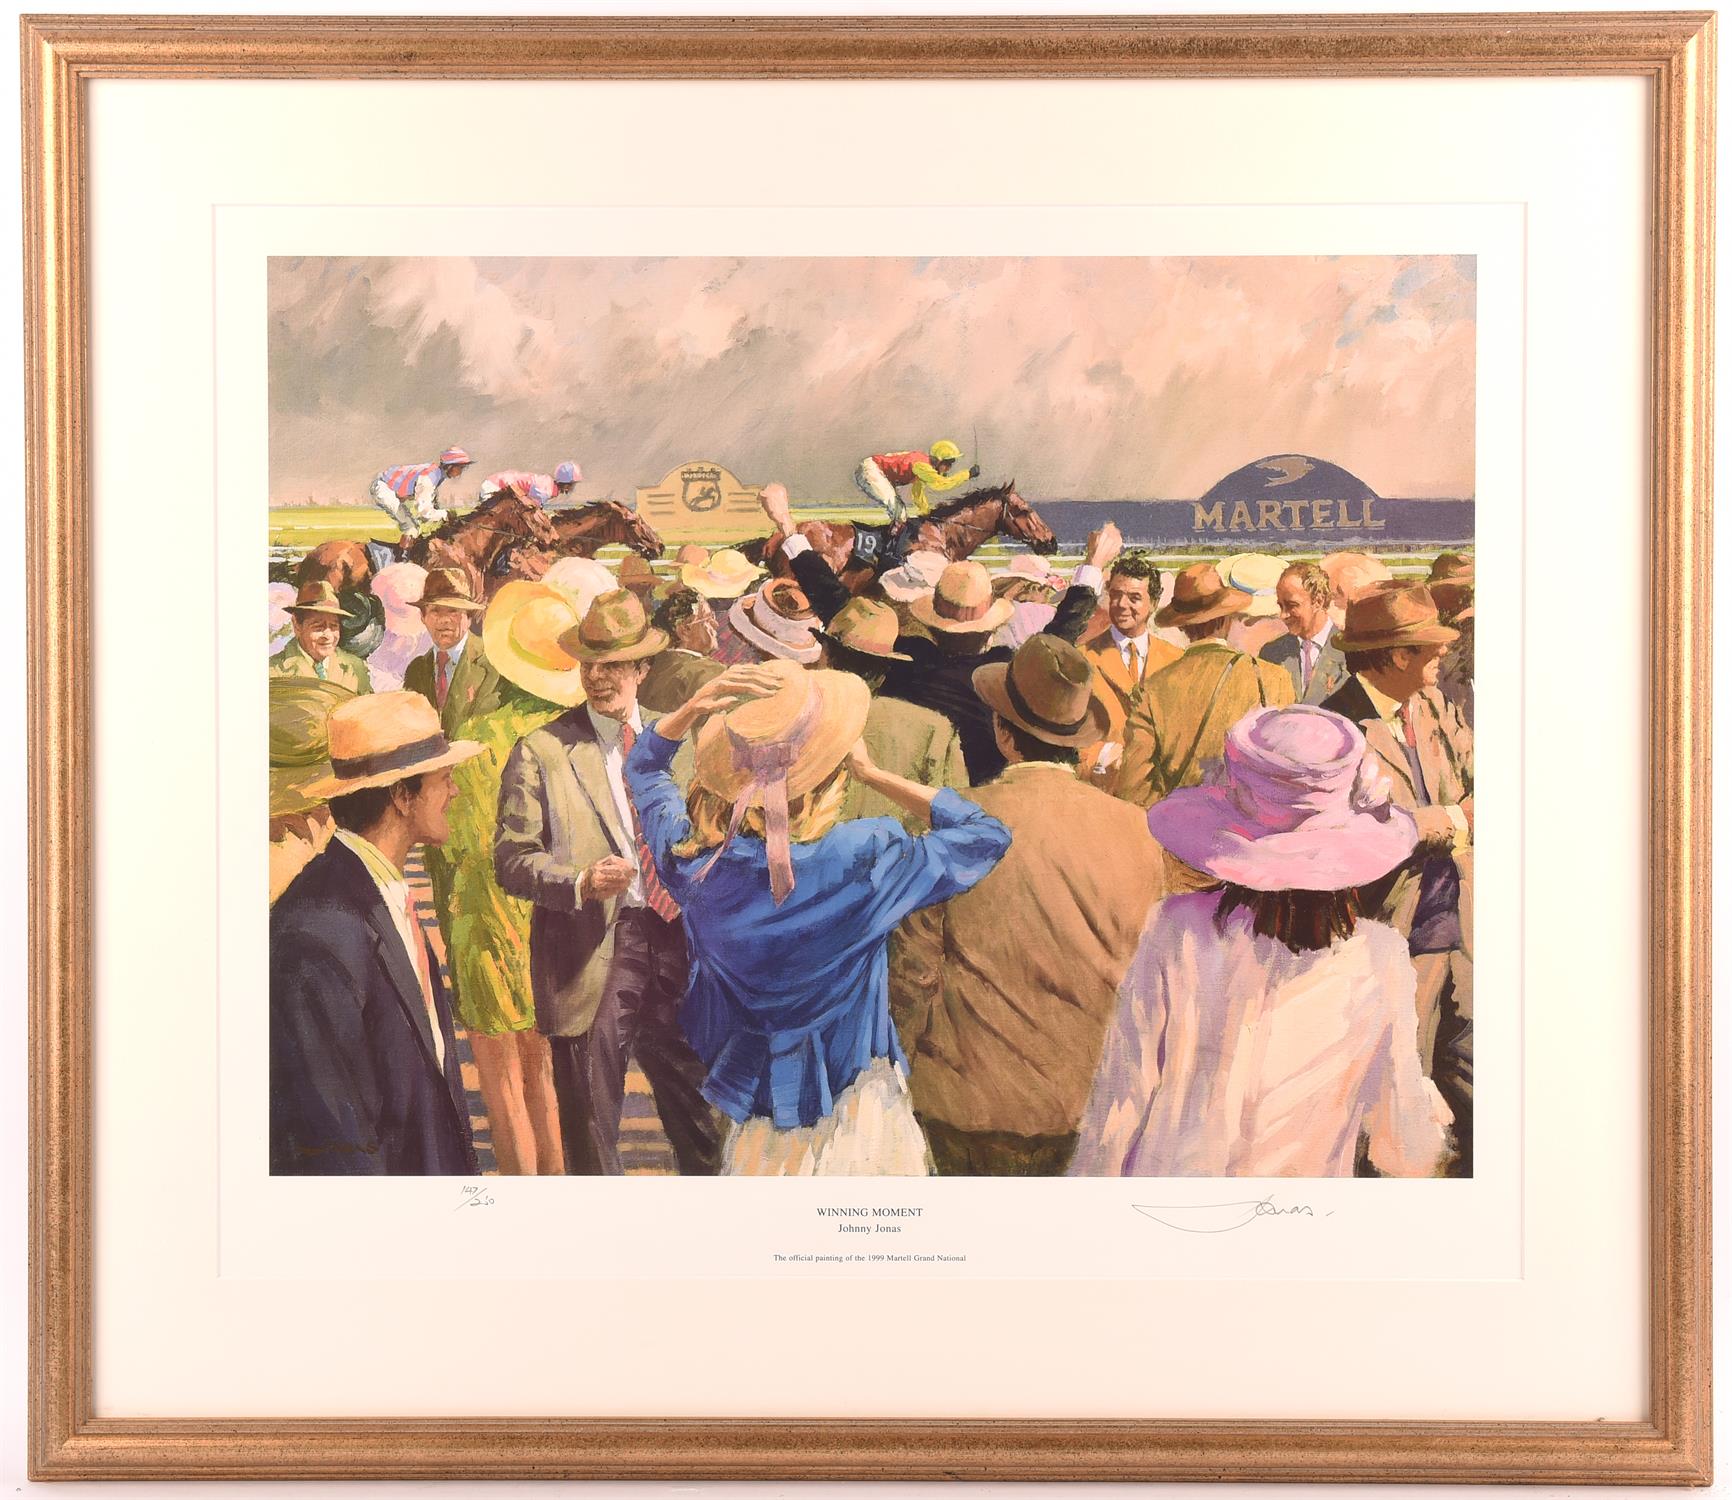 Two Horse Racing related limited prints - Limited edition print (63/100) of 'Business as usual' by